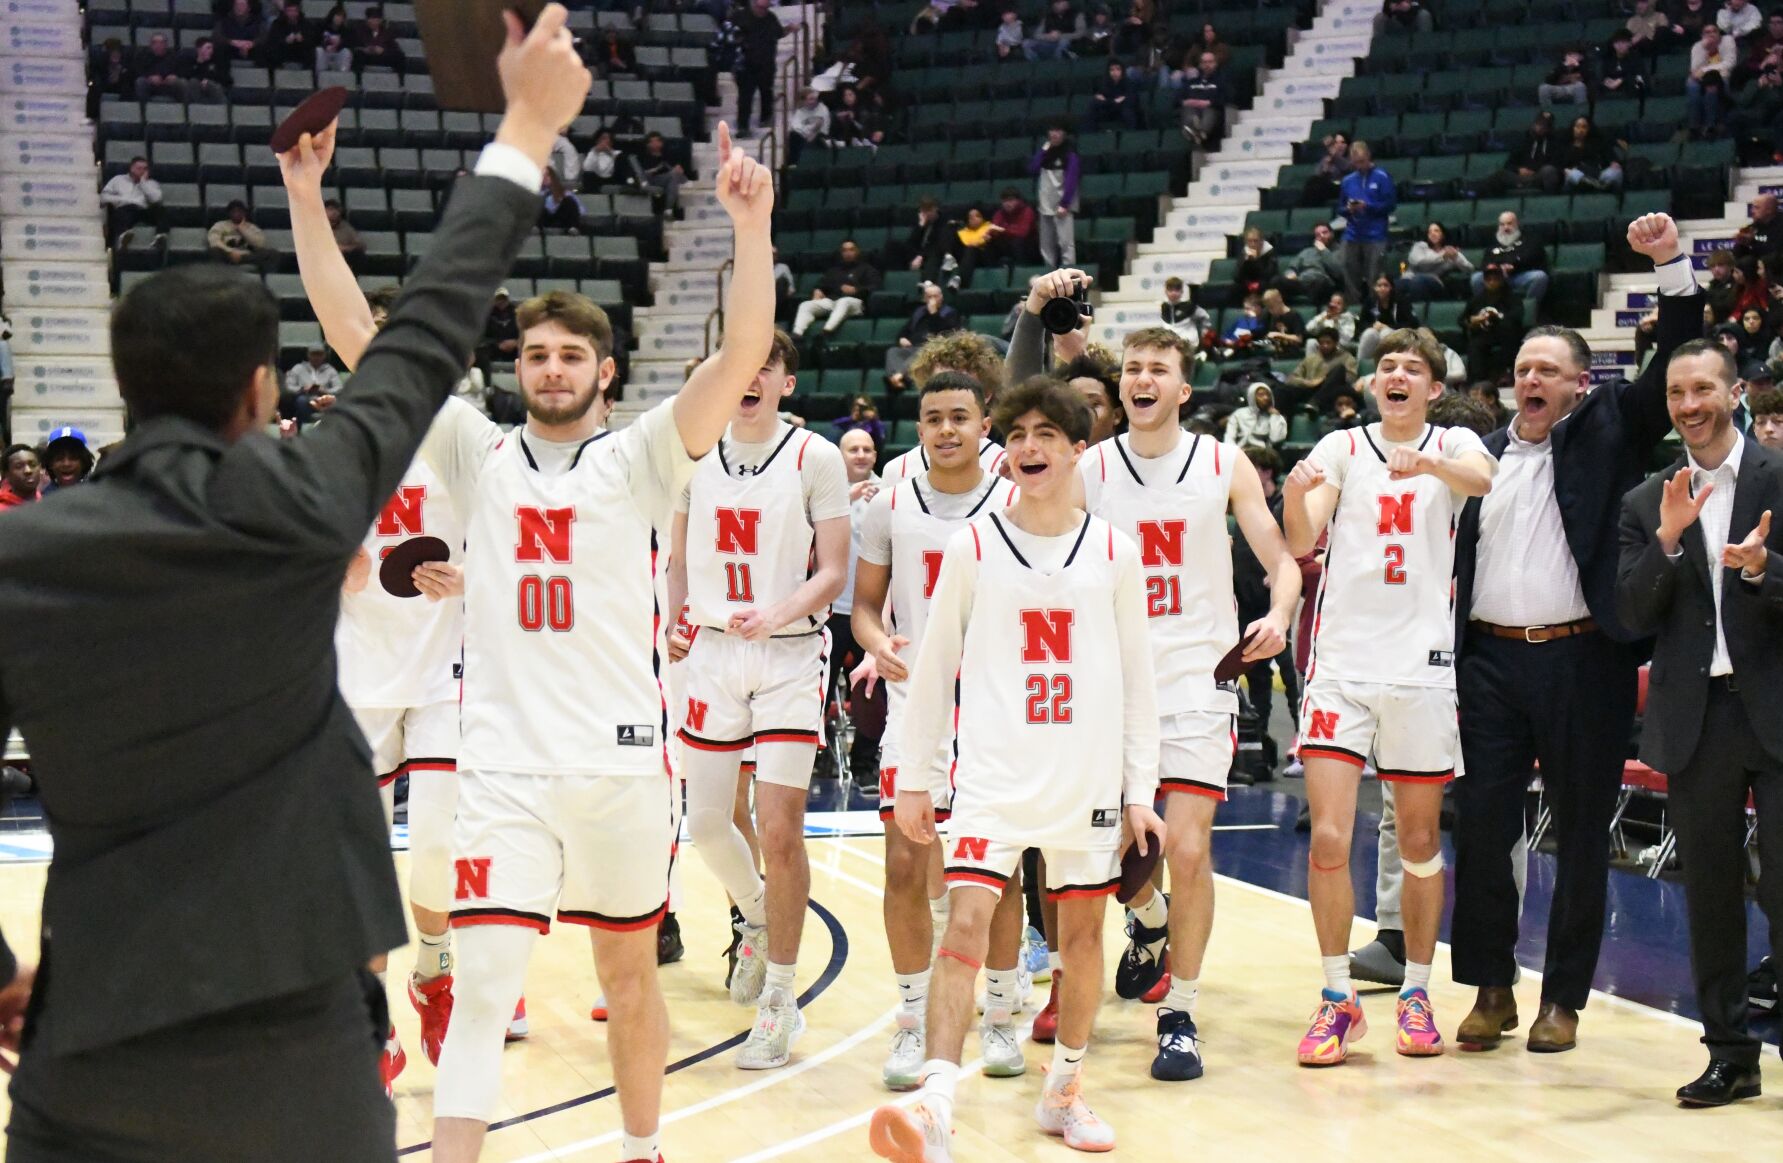 Niskayuna Basketball Ends 46-Year Drought with 70-66 Win and MVP Daniel Smalls Shines